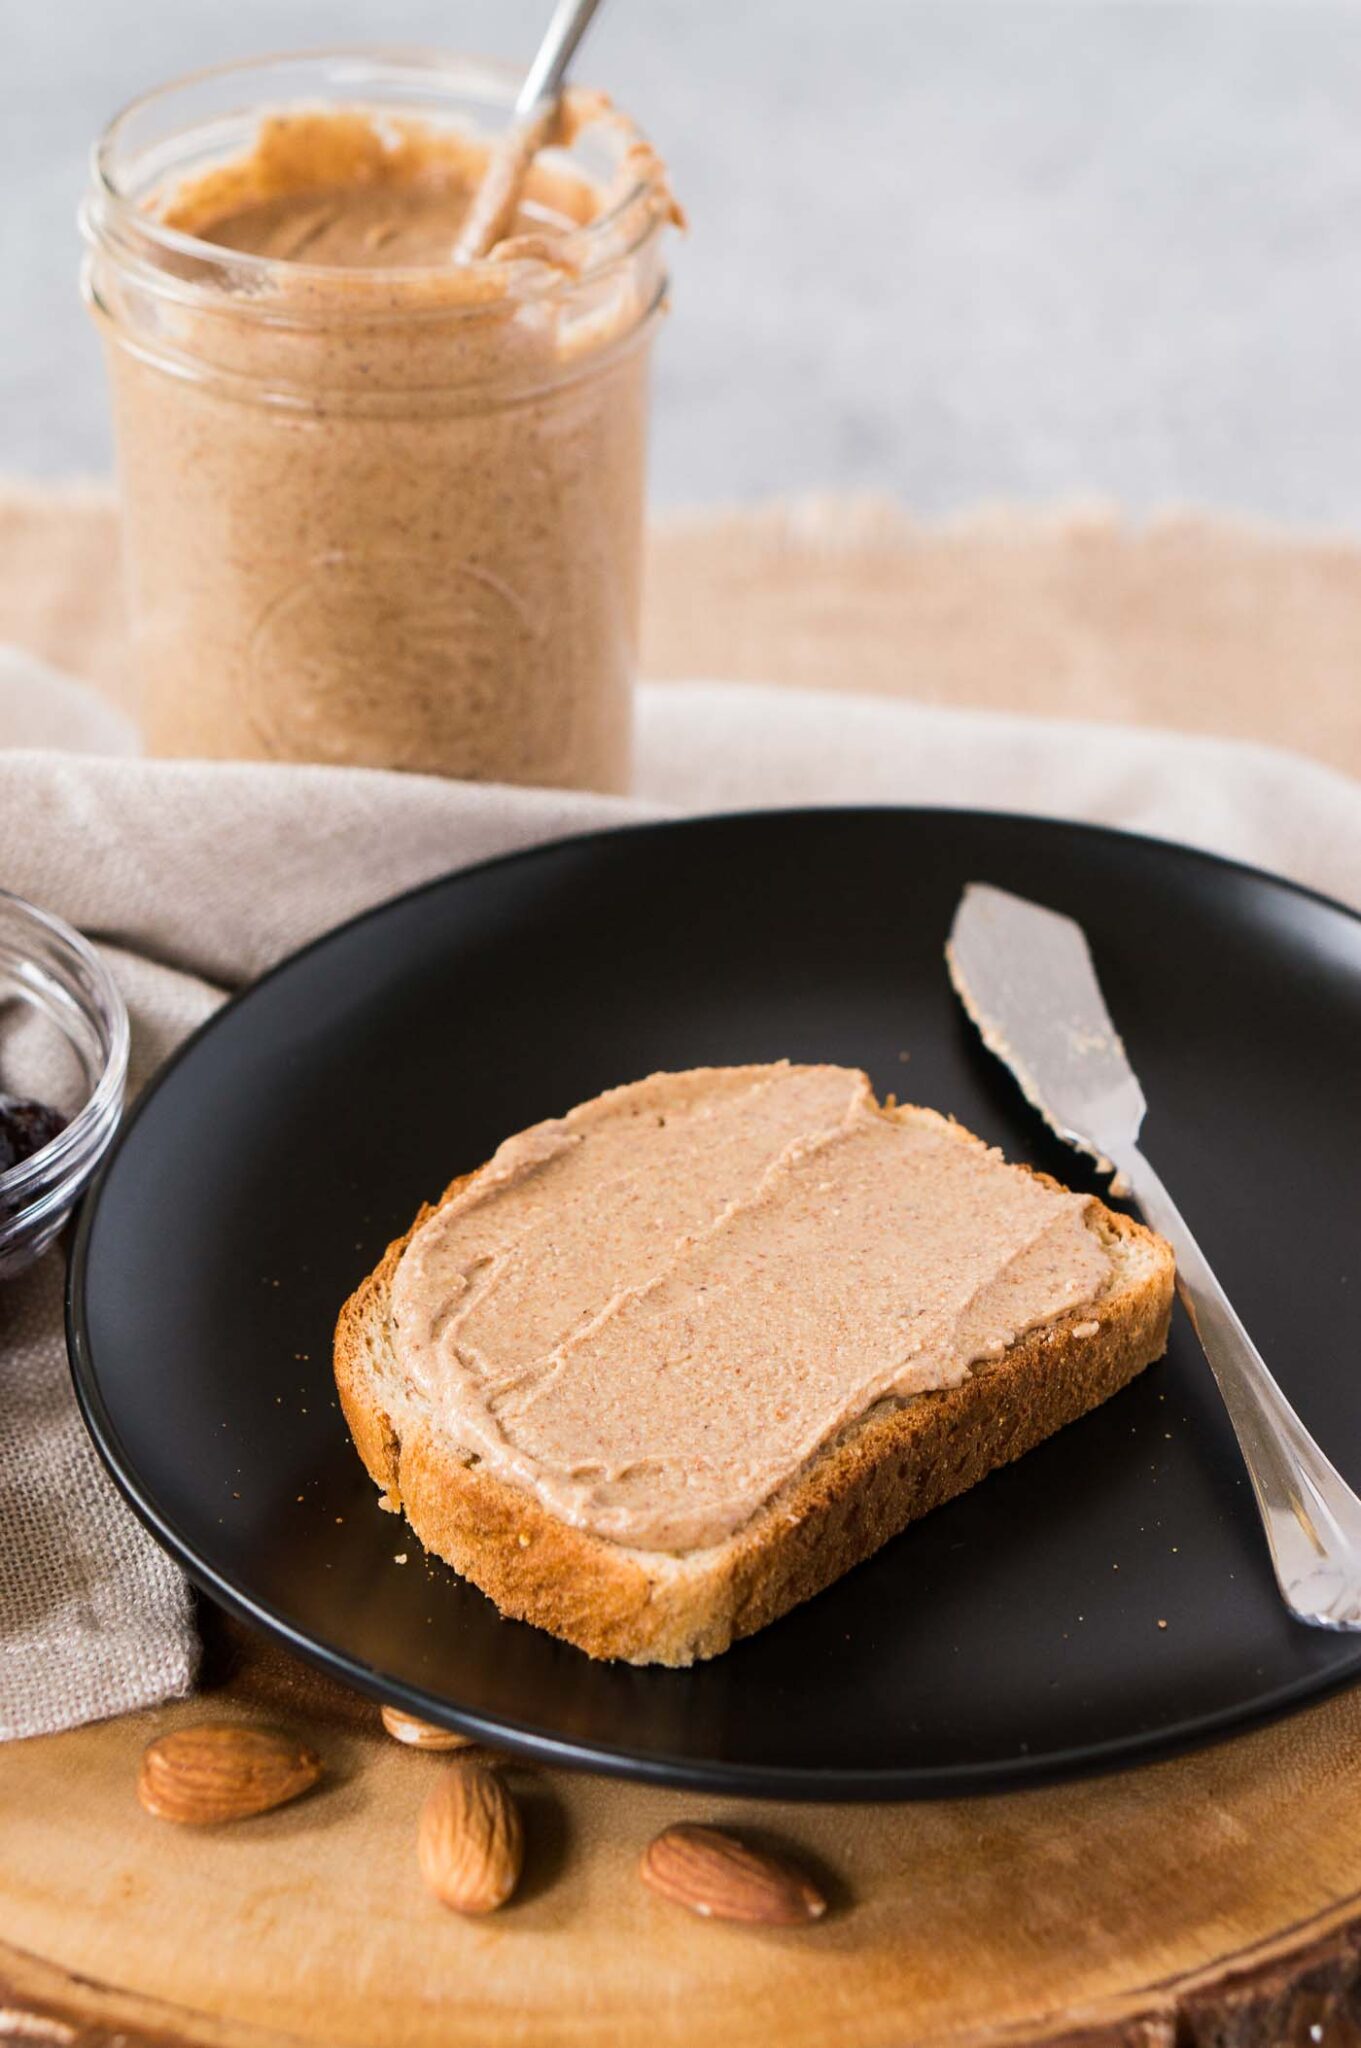 almond butter spread on a toast